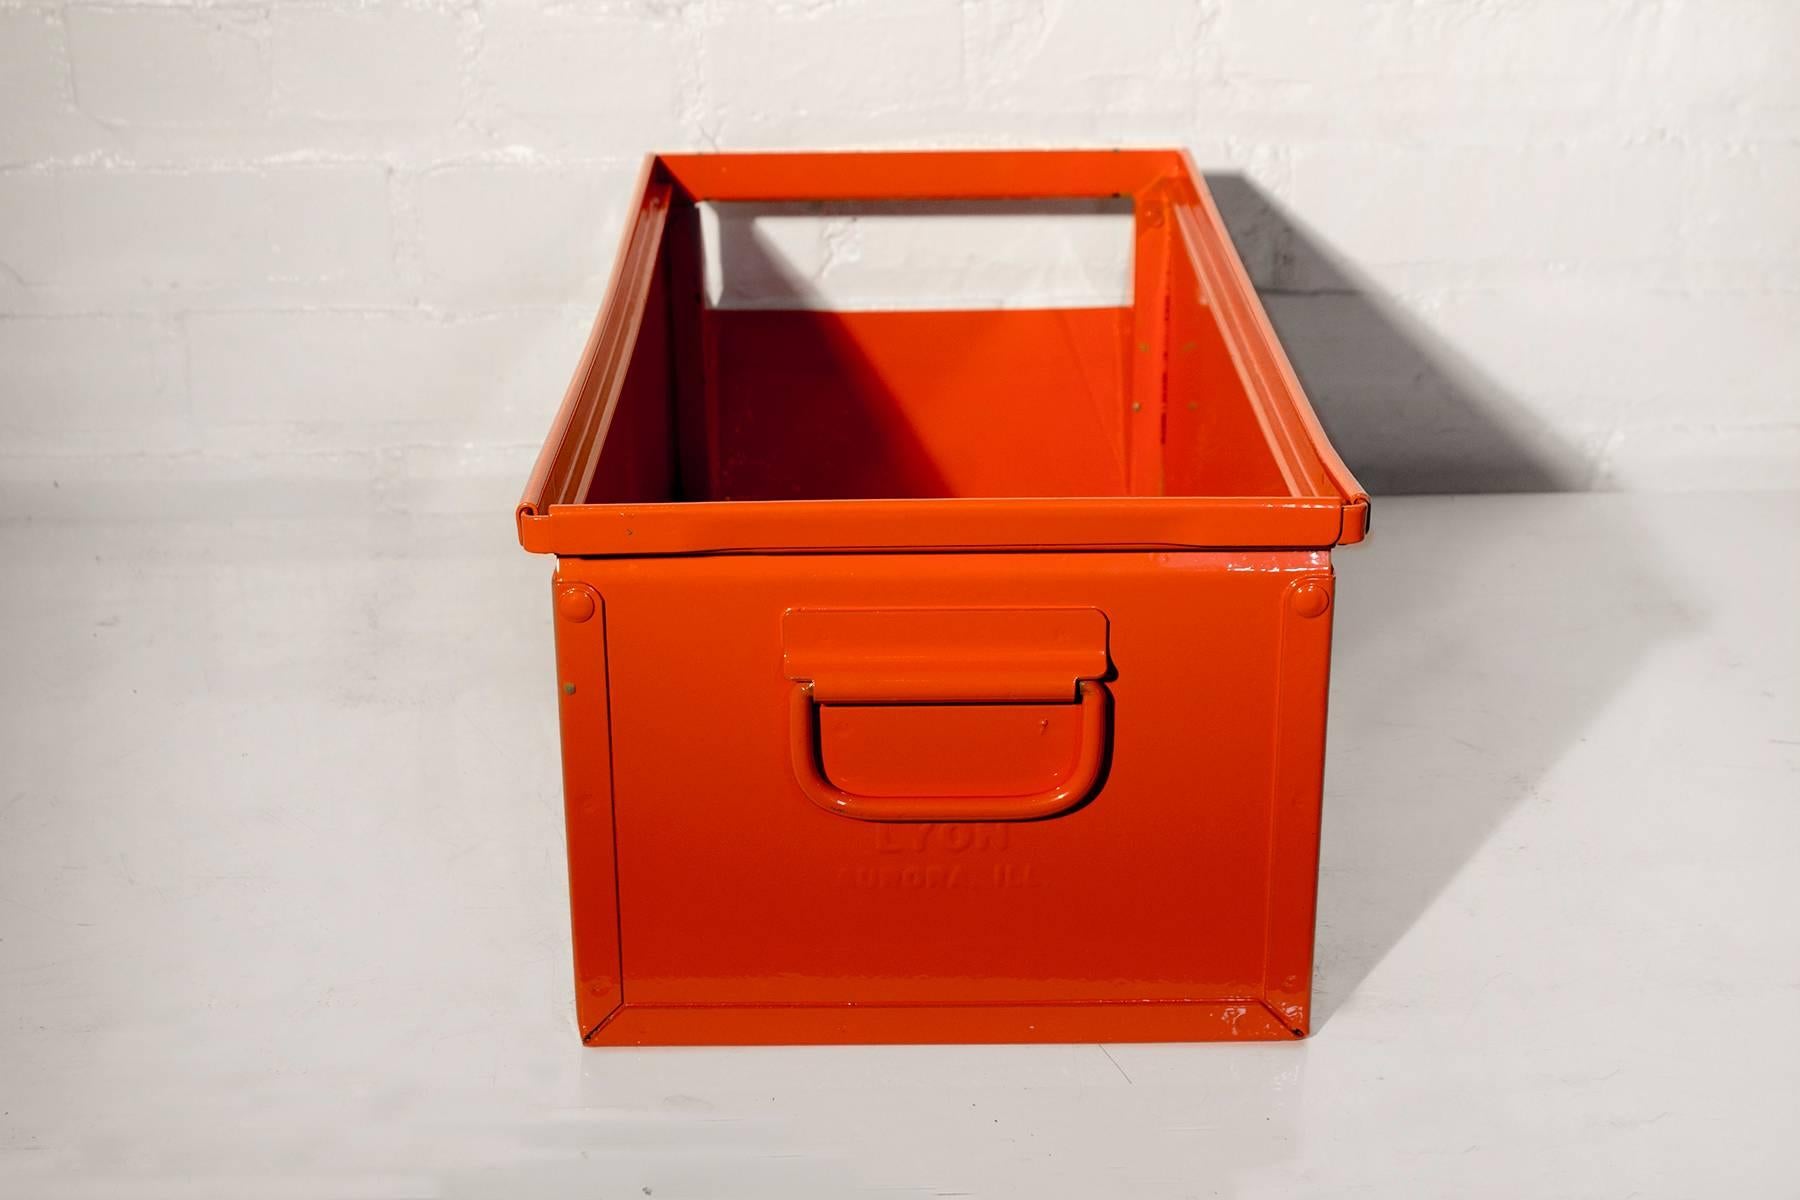 Vintage Lyon manufacturing Industrial storage bin newly refinished in safety orange powder coat finish. A new twist on the machine age olive drab bin. Great for books, toys, towels or just plain "stuff".

Dimensions: 10" D x